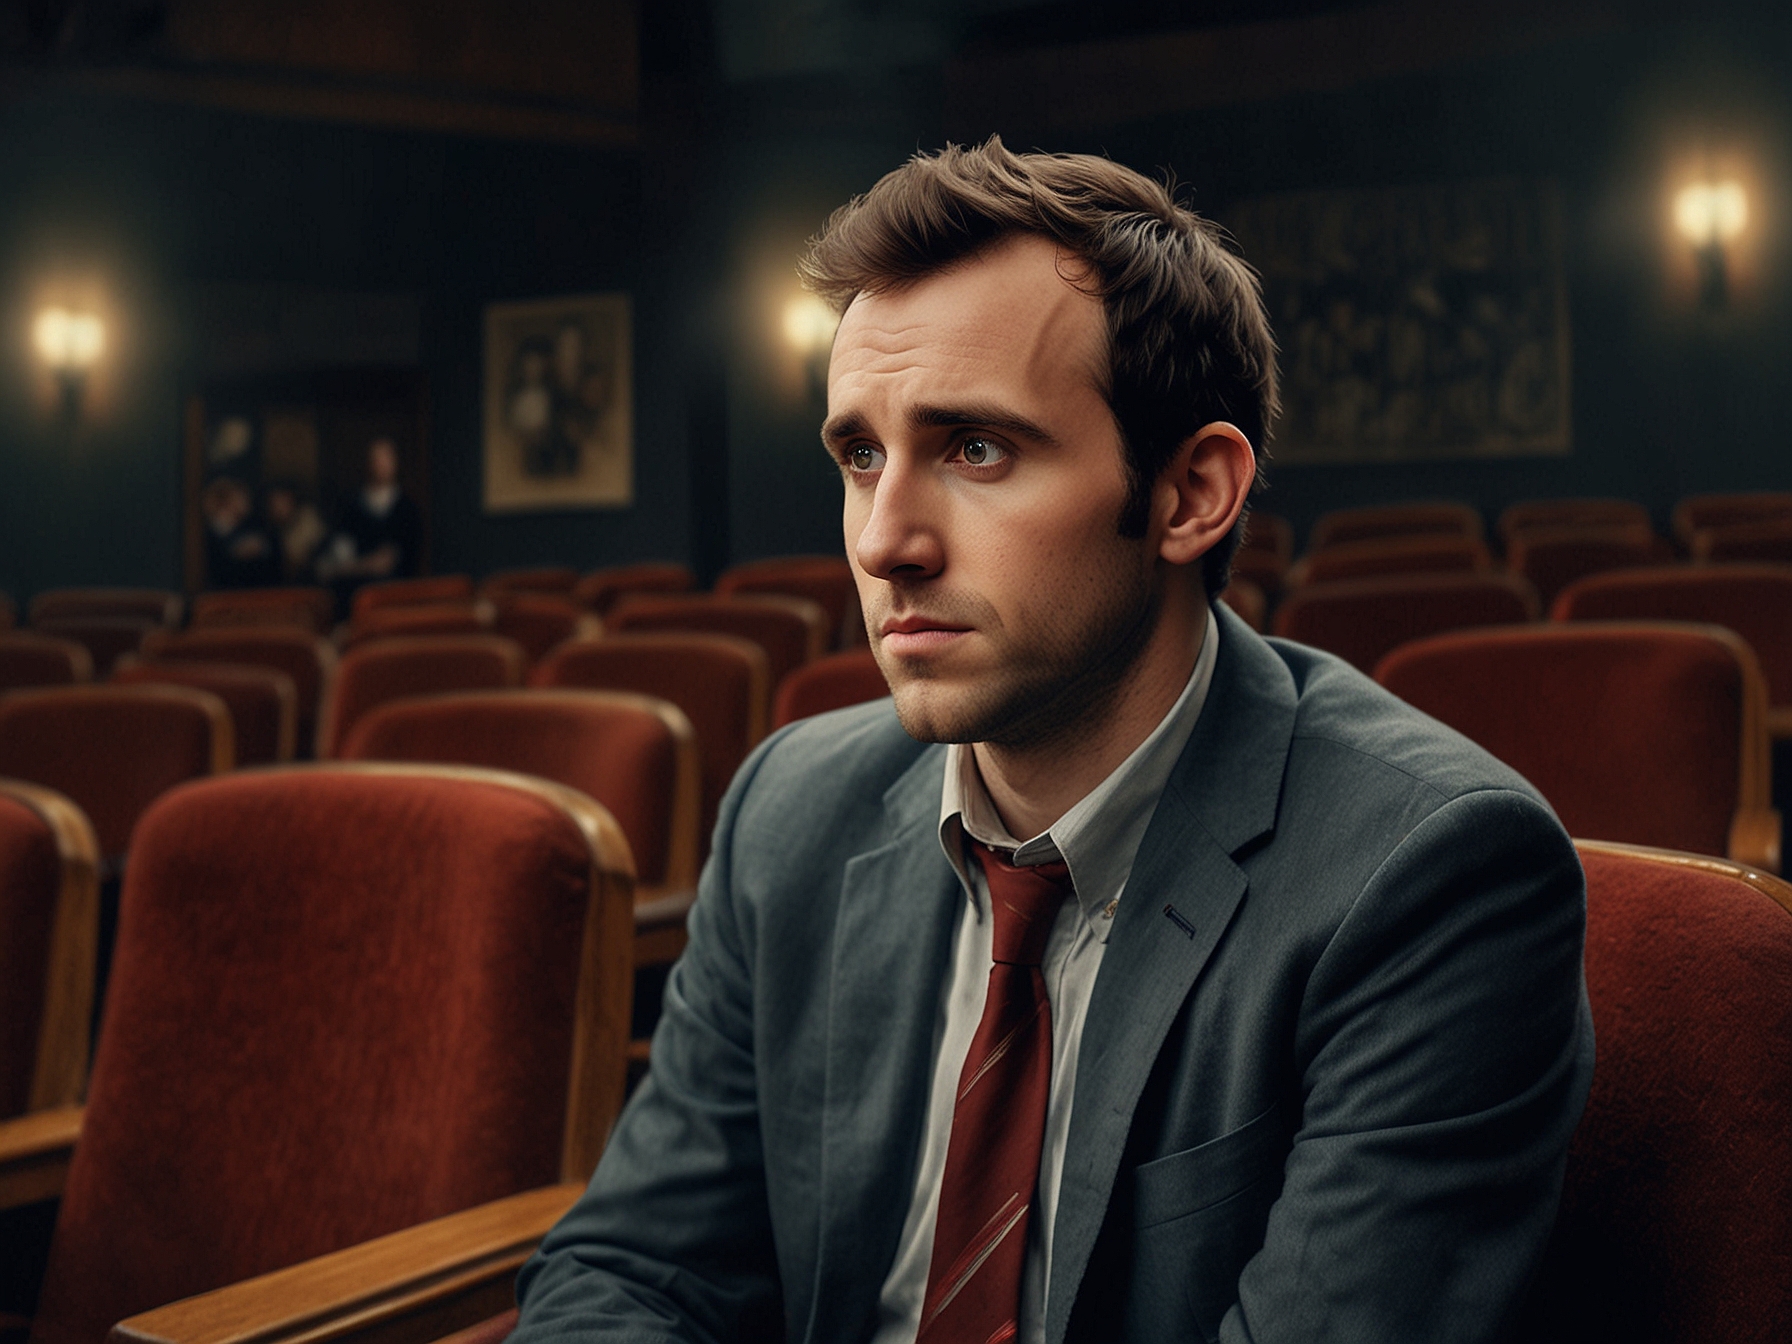 A contemplative Matthew Lewis in a theater setting, illustrating his focus on diverse acting roles post-Harry Potter, highlighting his evolving career.